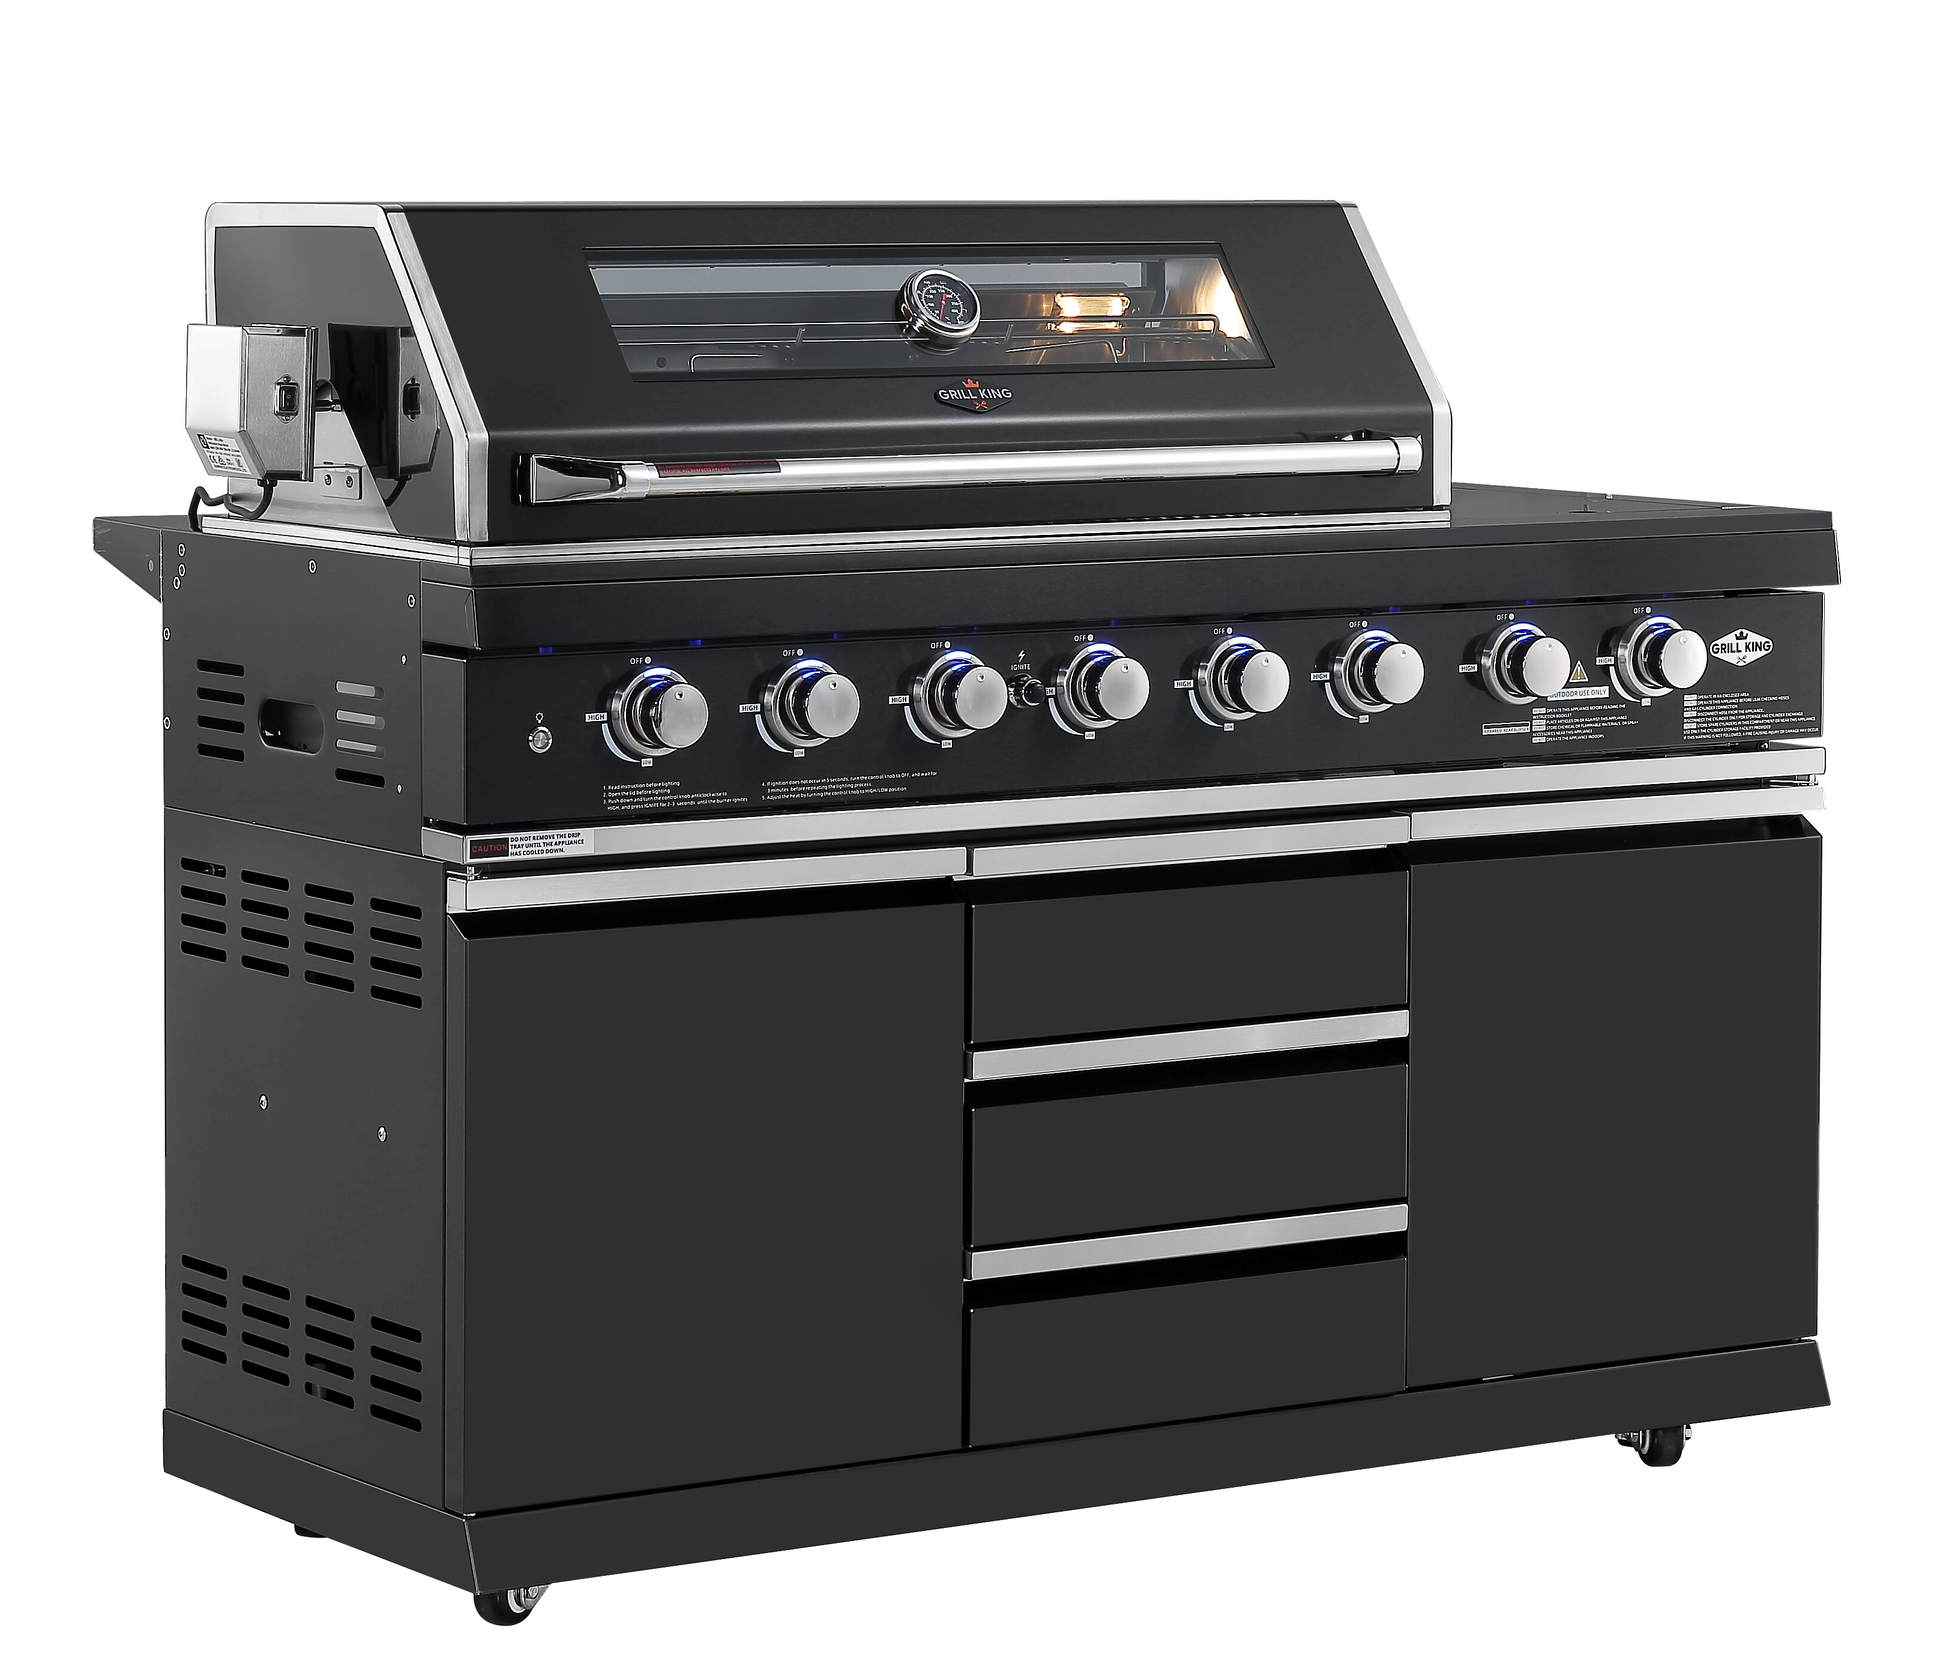 Kingsley 6-Burner Outdoor BBQ Kitchen: Black Stainless Steel, Stone Bench, Fridge, Sink, Height Adjustable, Rotisserie with BBQ Cover